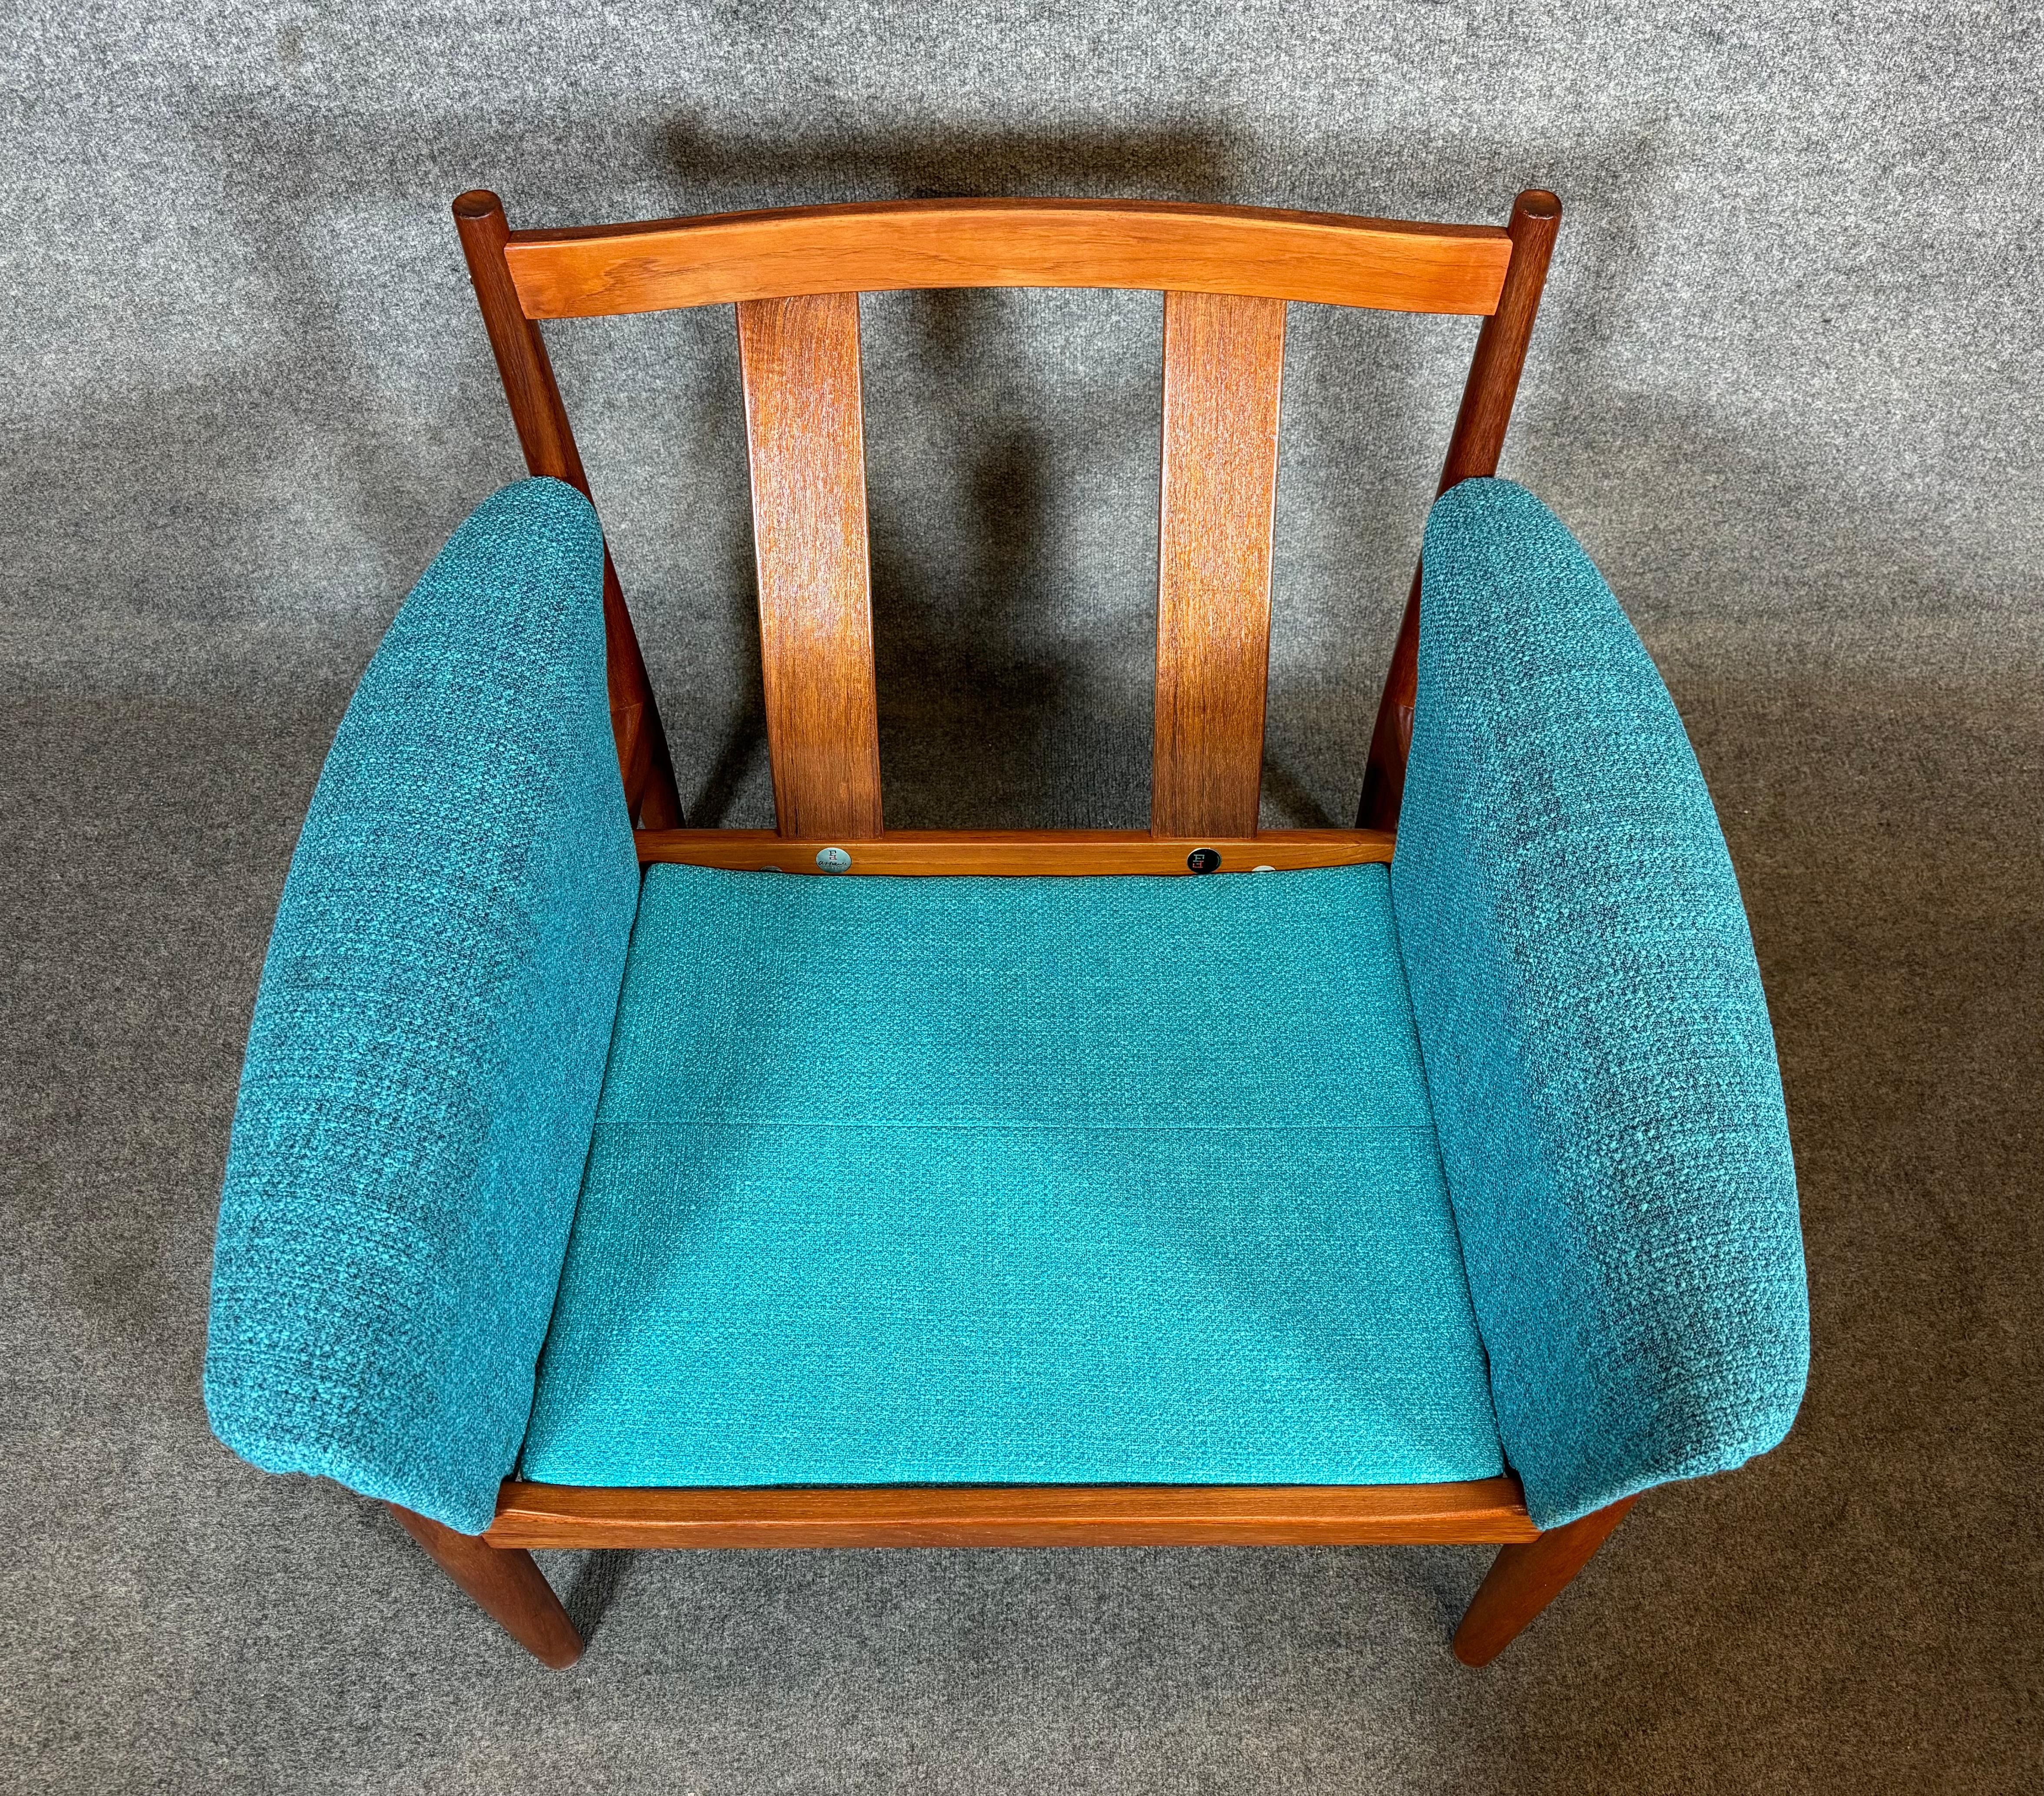 Vintage Danish Mid Century Modern Teak Lounge Chair and Ottoman by Grete Jalk For Sale 1